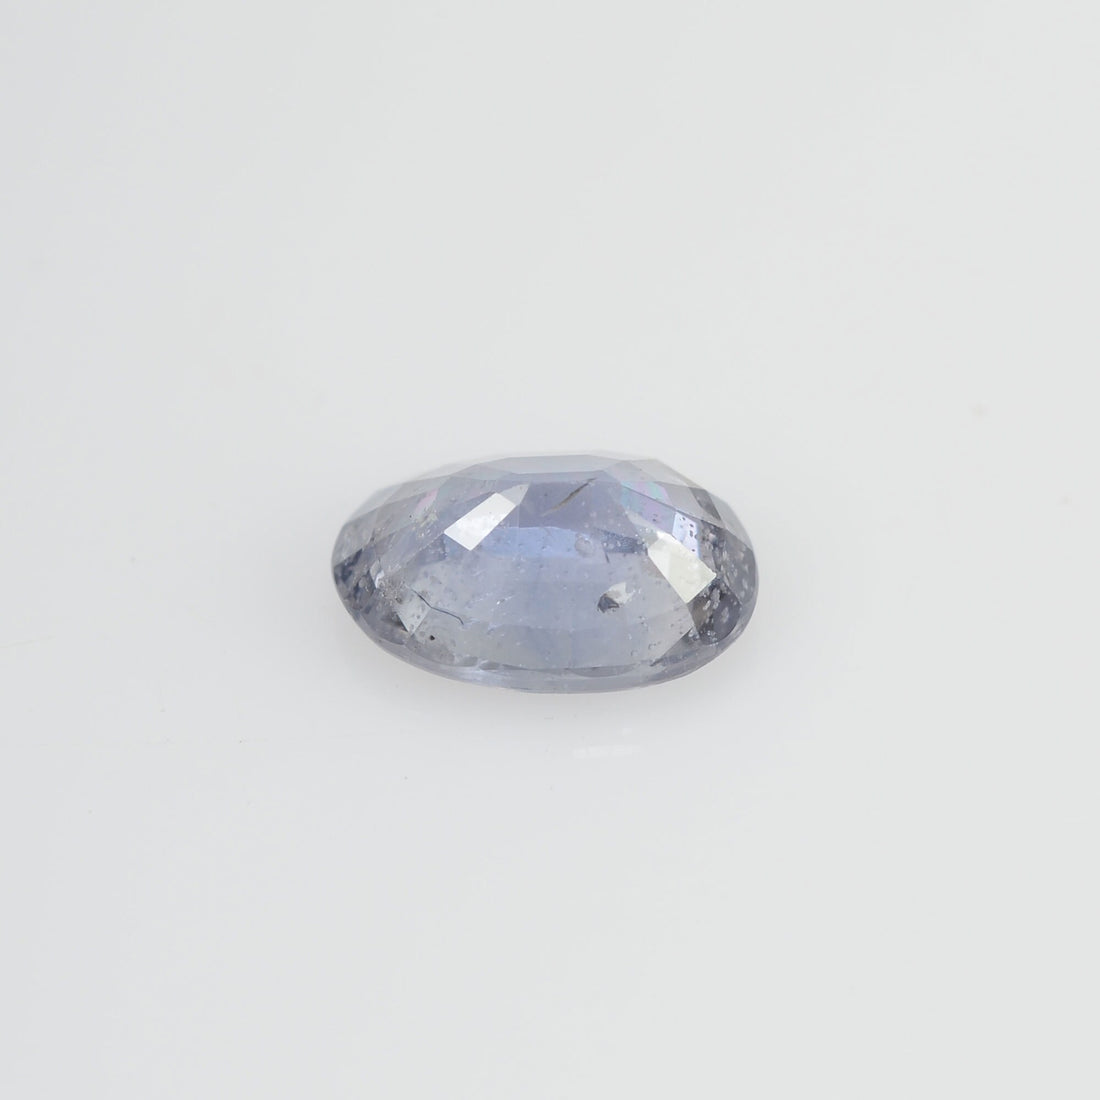 1.07 cts Natural Blue Teal Sapphire Loose Gemstone Oval Cut